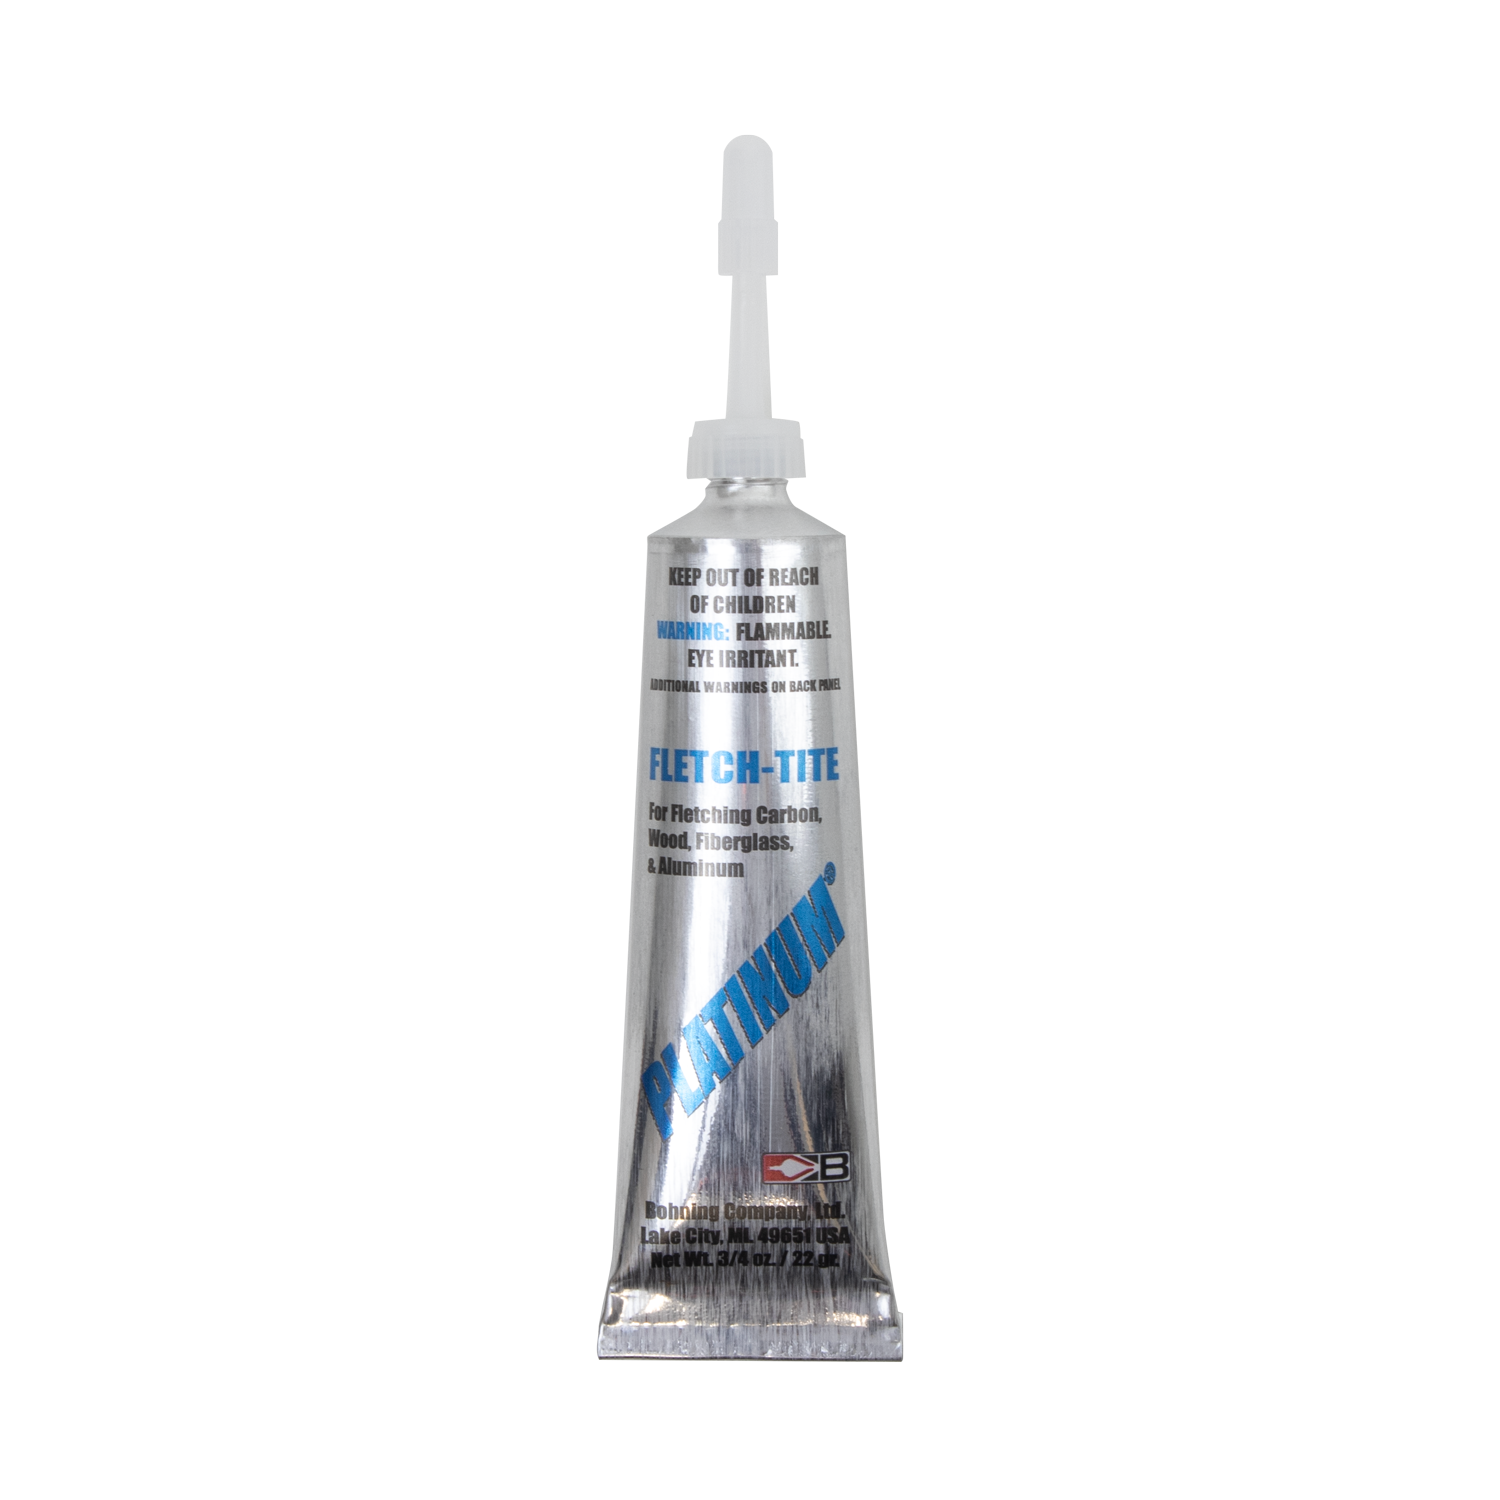 Fishing Tackle Glue, Fast Bonding Fishing Rod Glue, Suitable for all  fishing gear repairs such as bar and rope connection, fishing rod crack  repair